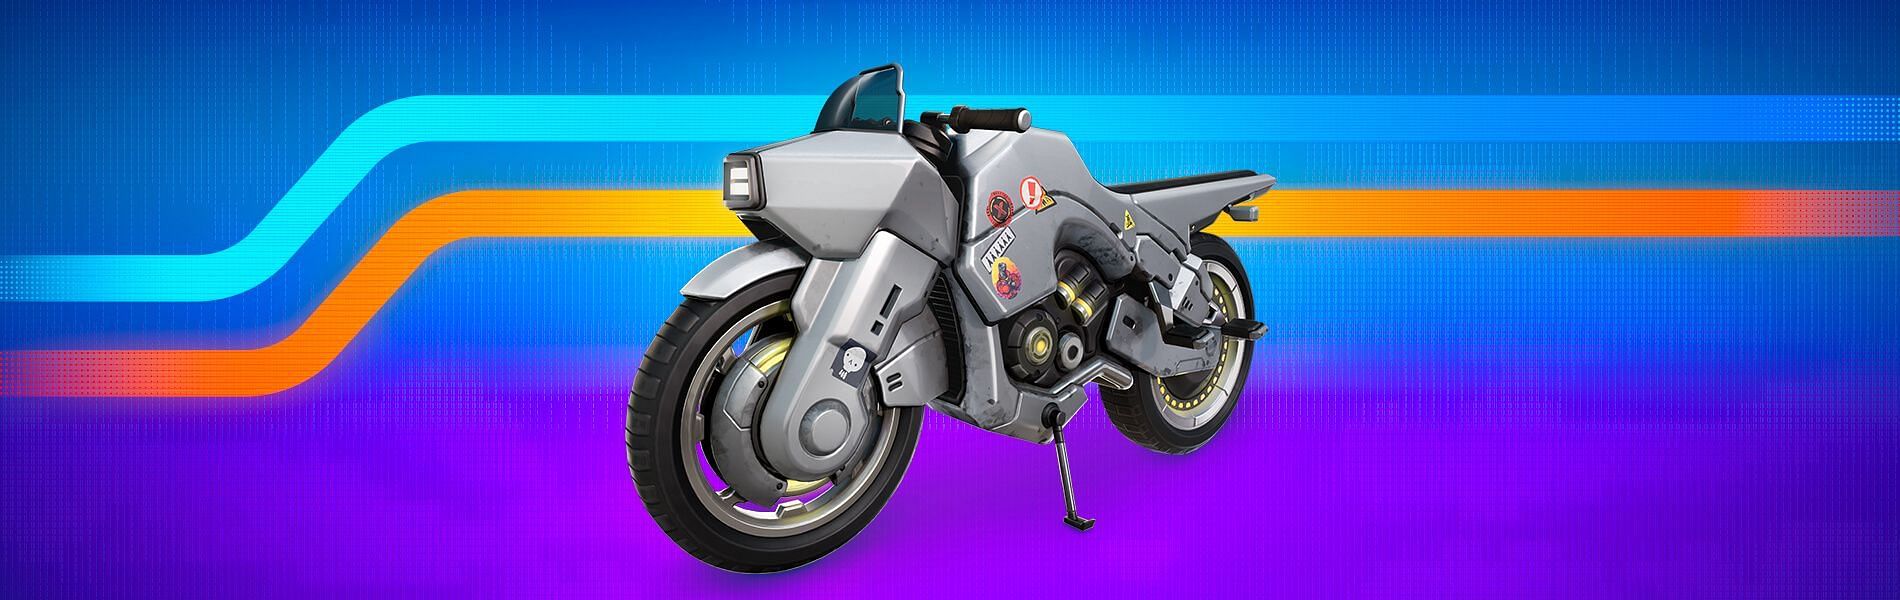 Rogue Bikes may look bulky, but they are fast (Image via Epic Games/Fortnite)